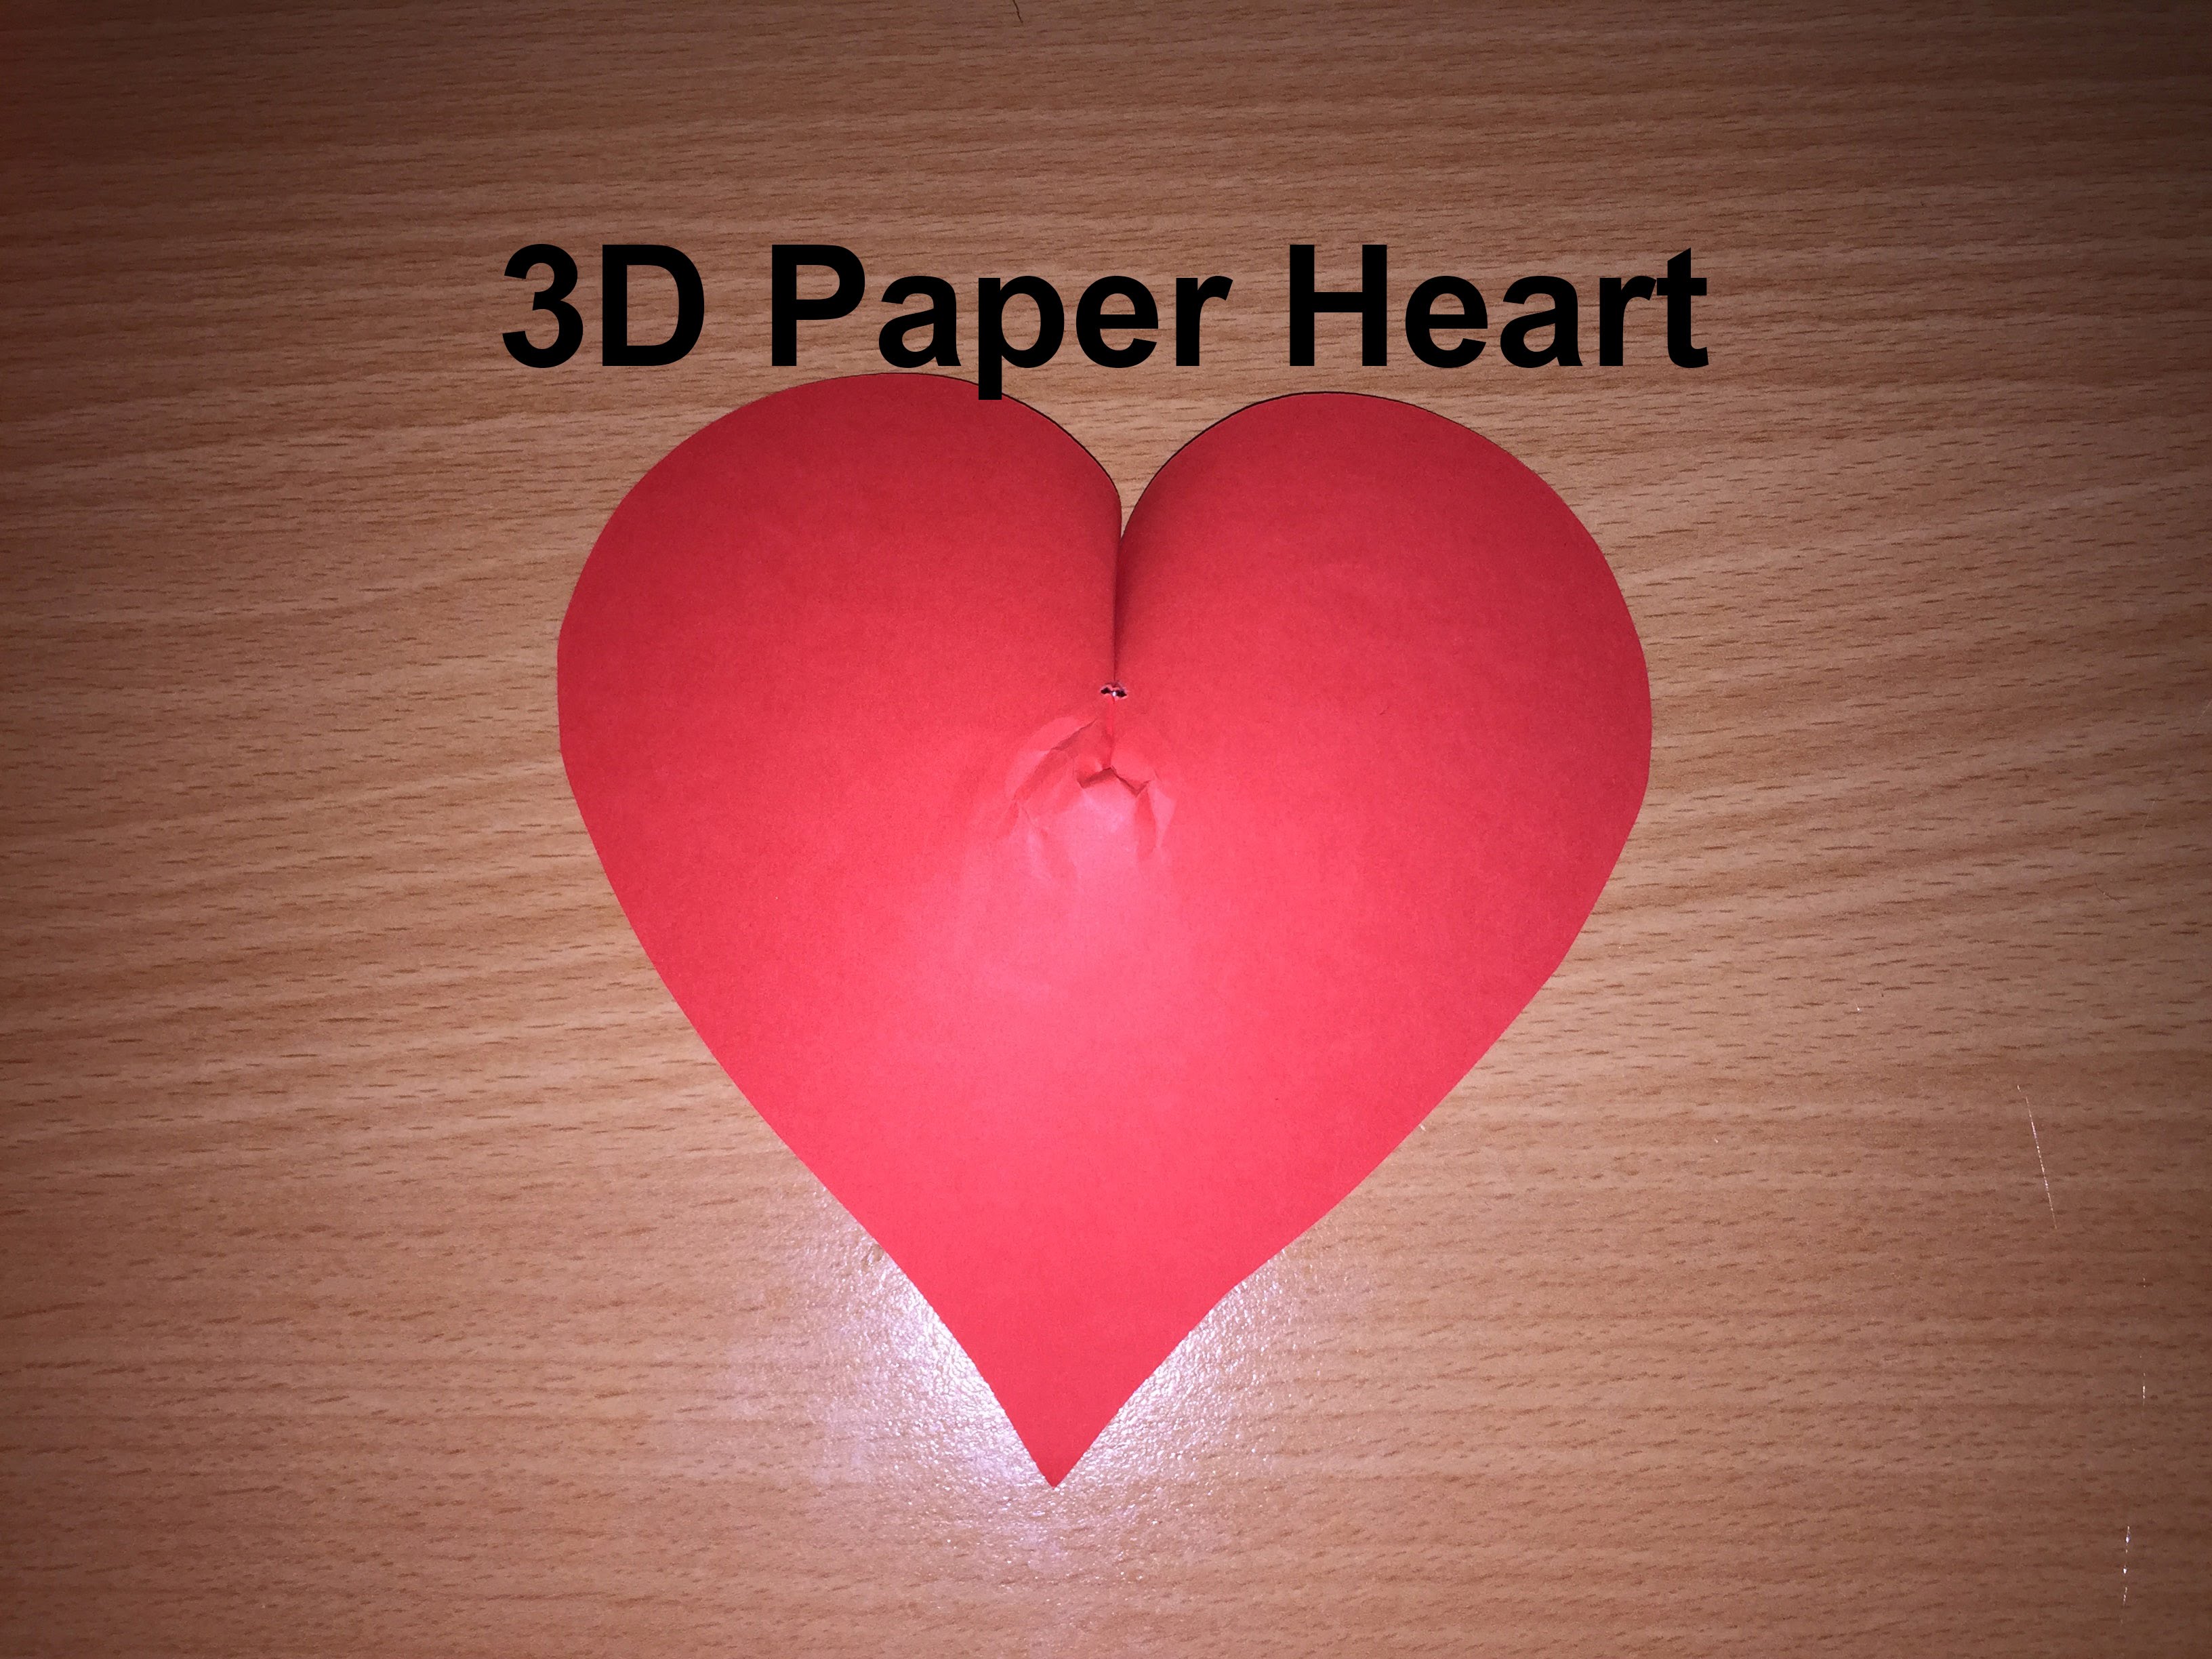 How to Make a 3D Paper Heart - DIY Paper Heart - YouTube